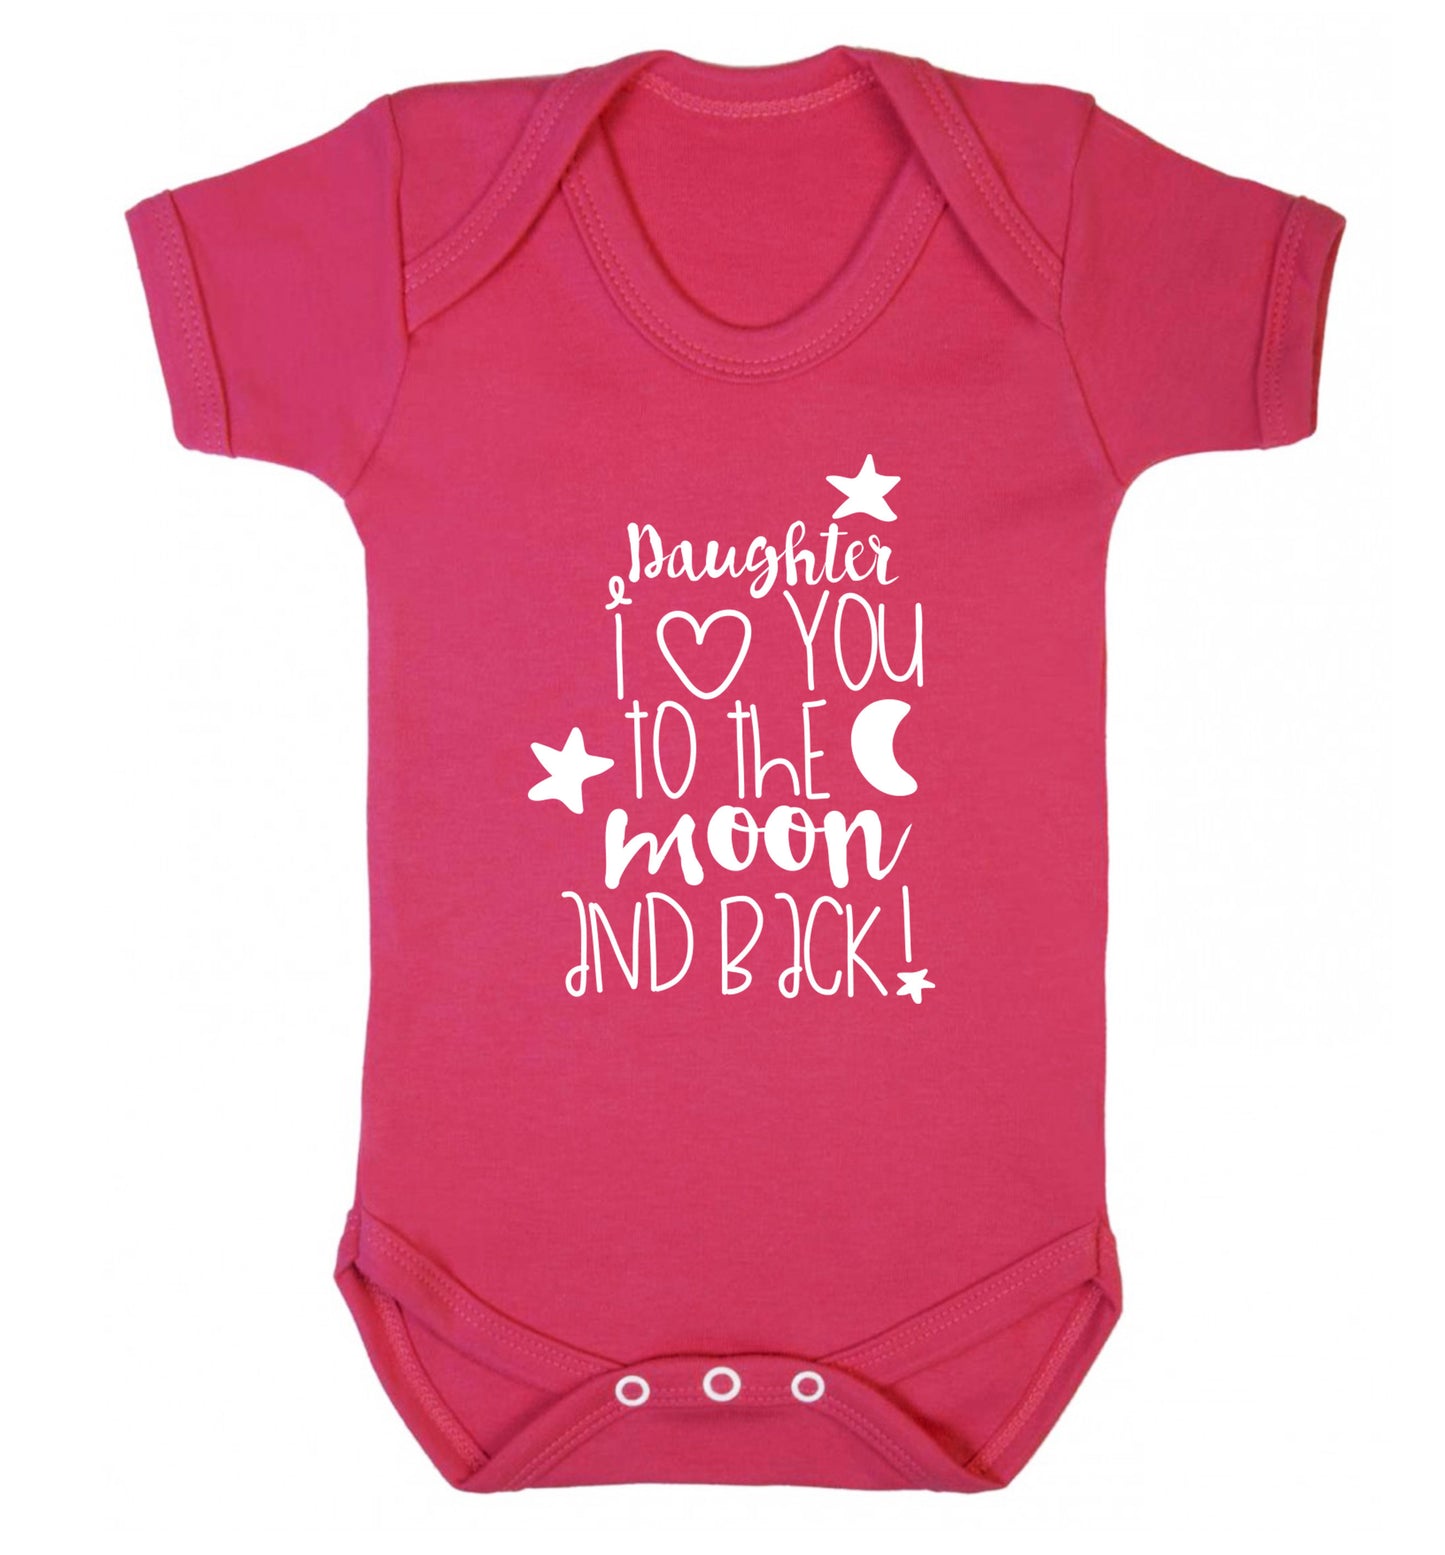 Daughter I love you to the moon and back Baby Vest dark pink 18-24 months